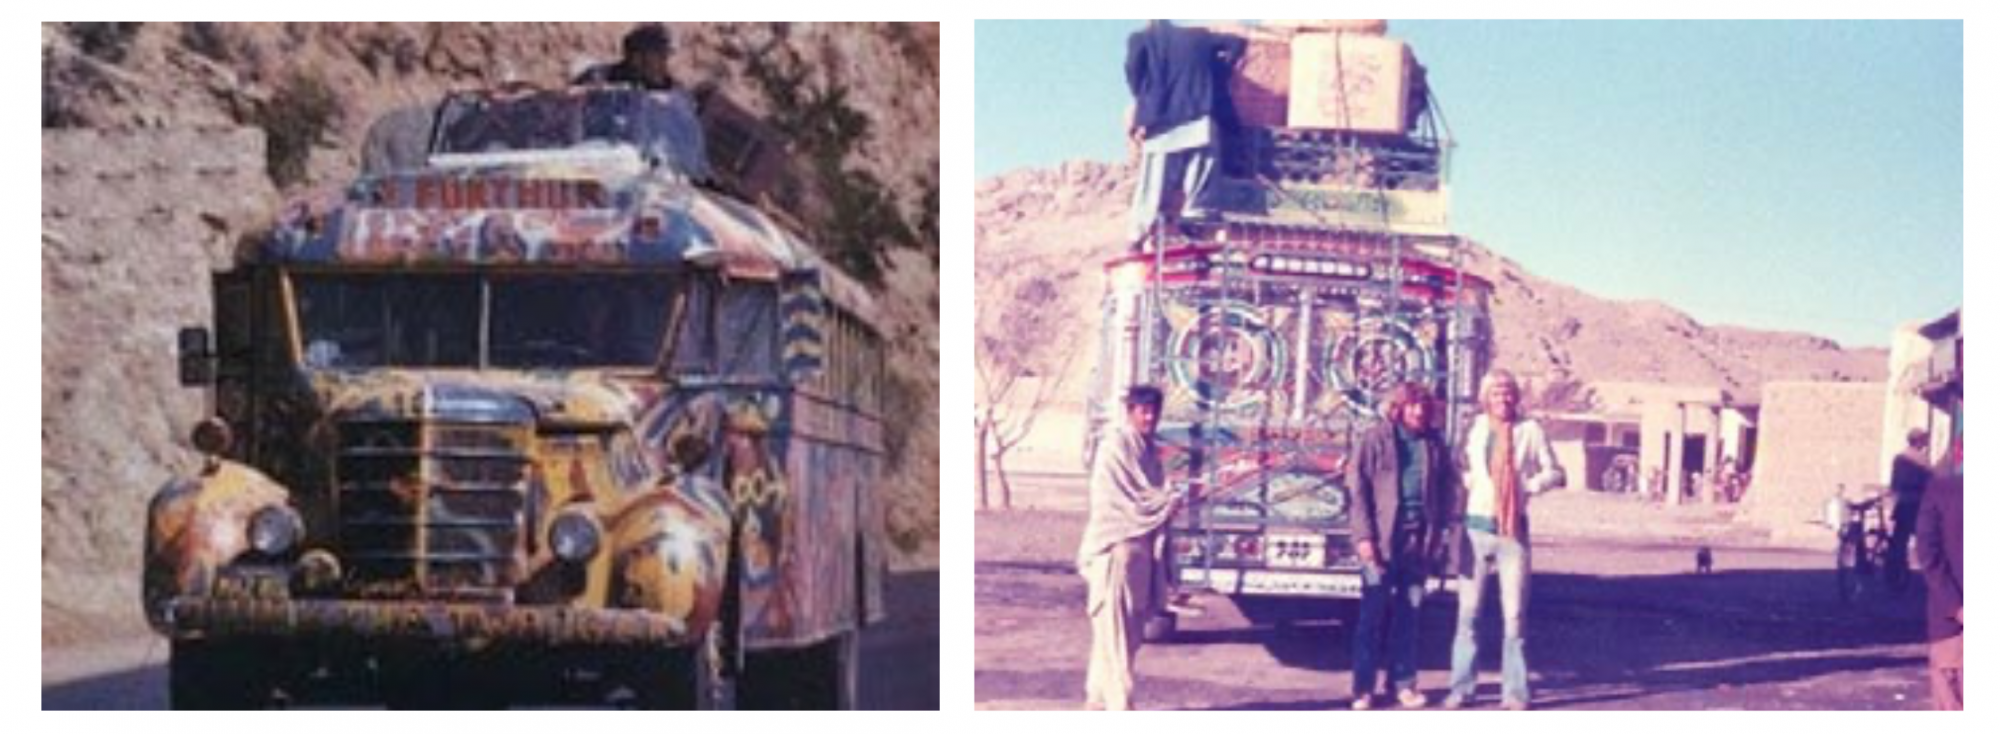 Left: Ken Kesey’s bus, Furthur, in America; Right: travelling on the hippie trail in Asia